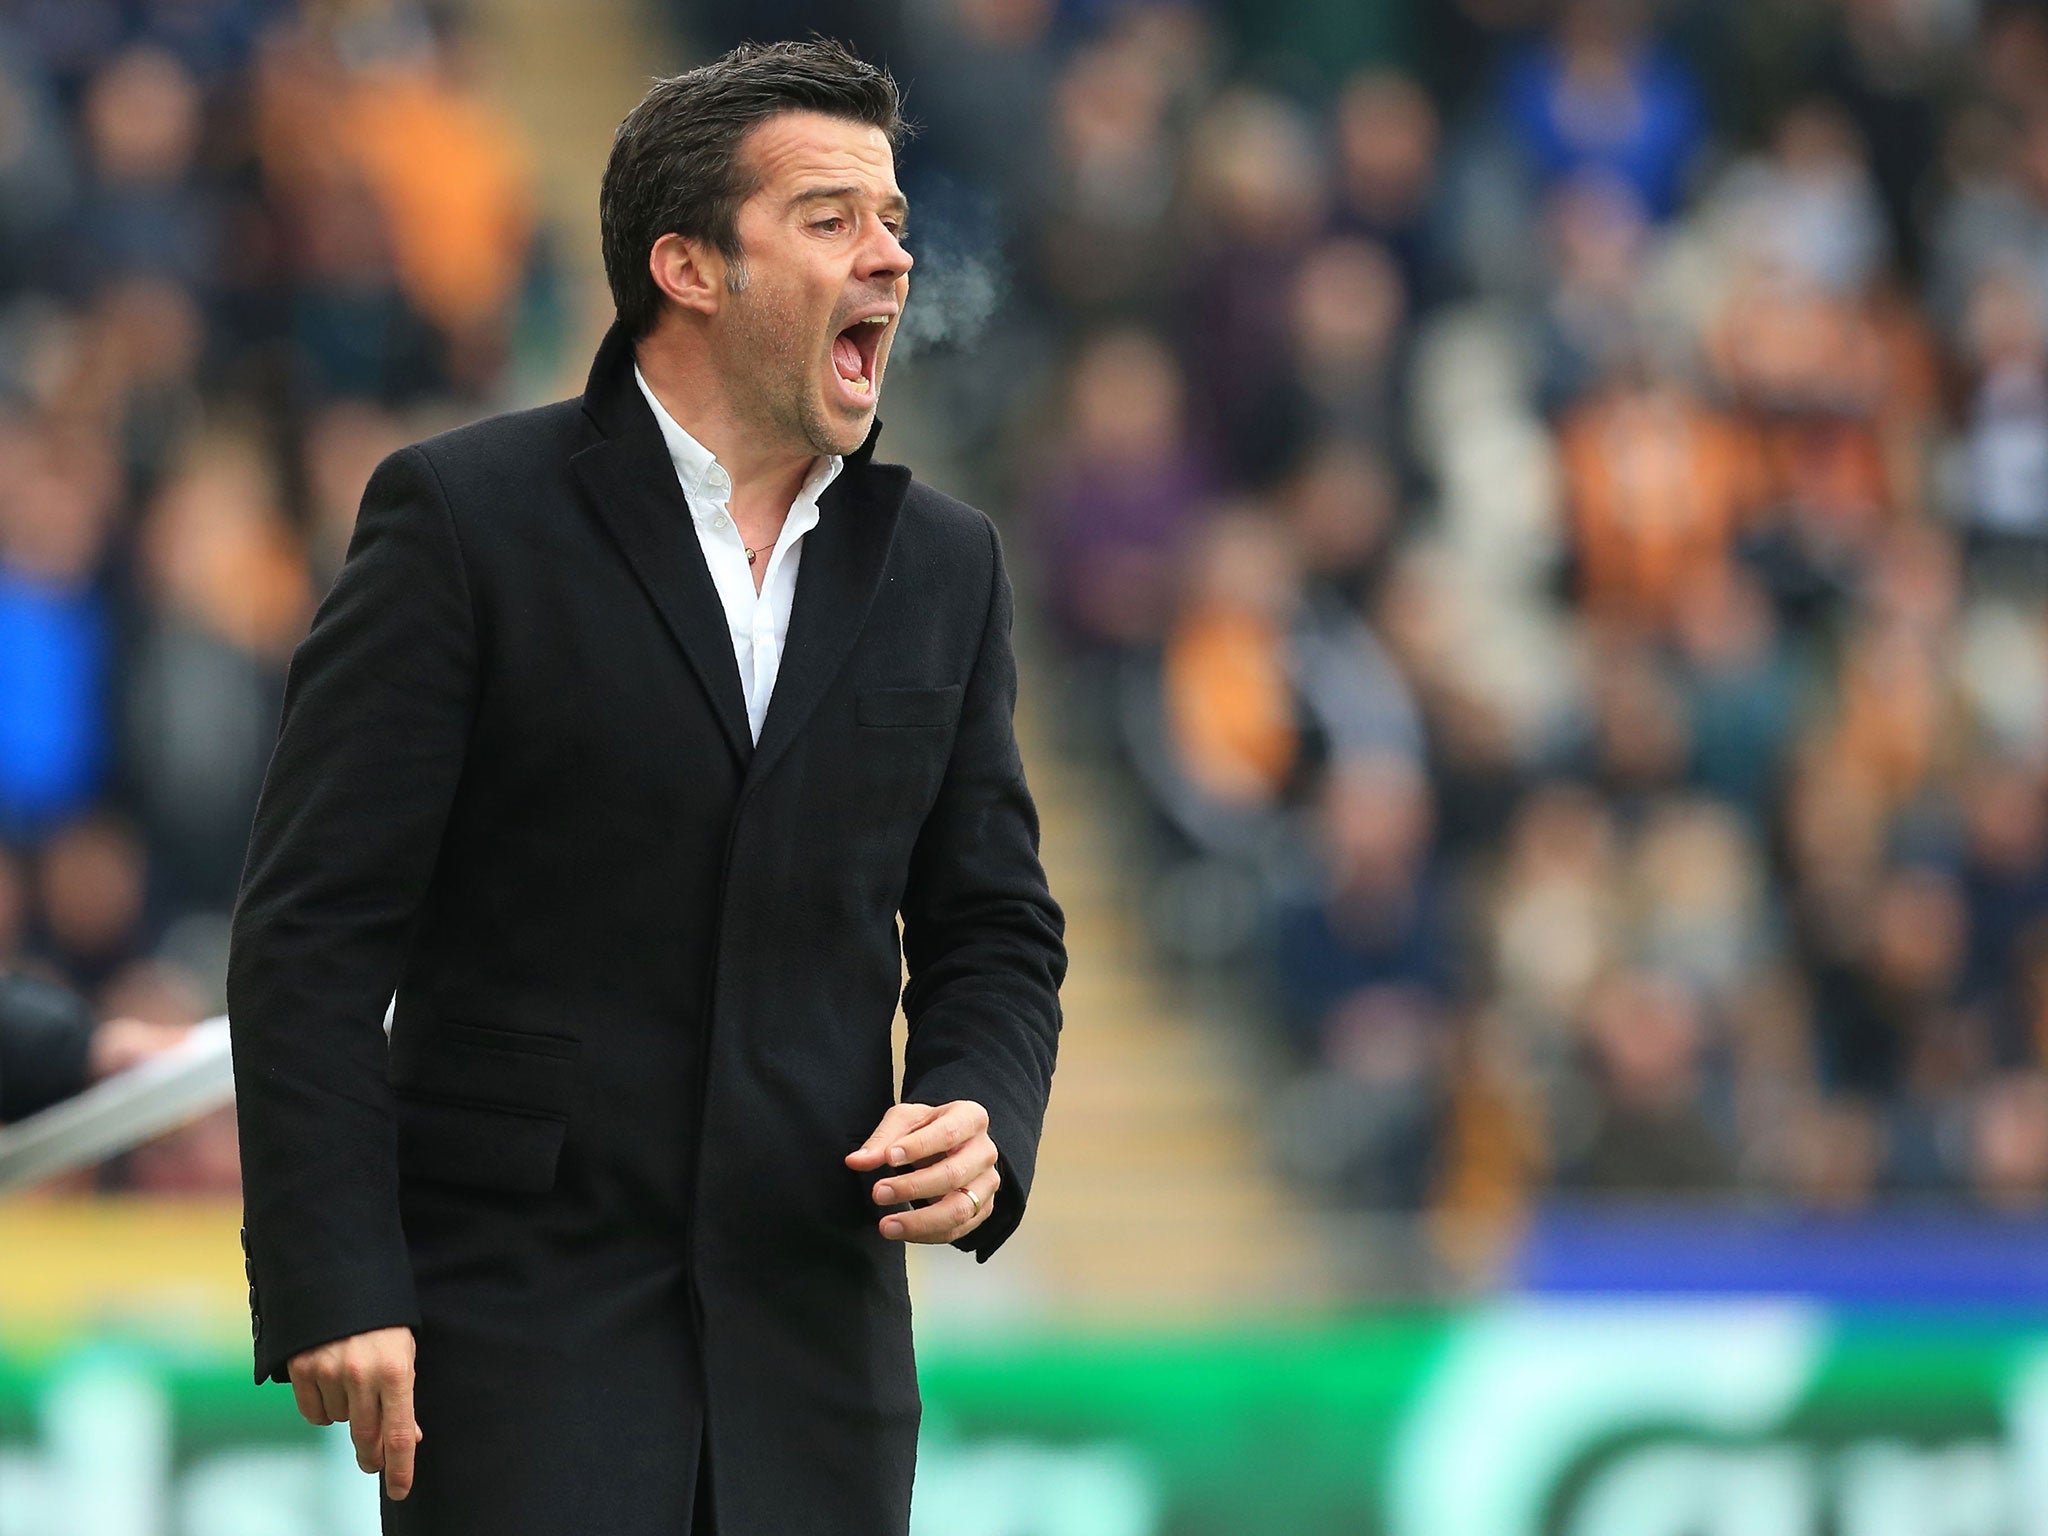 &#13;
Marco Silva's Hull can't afford to lose at Selhurst Park &#13;